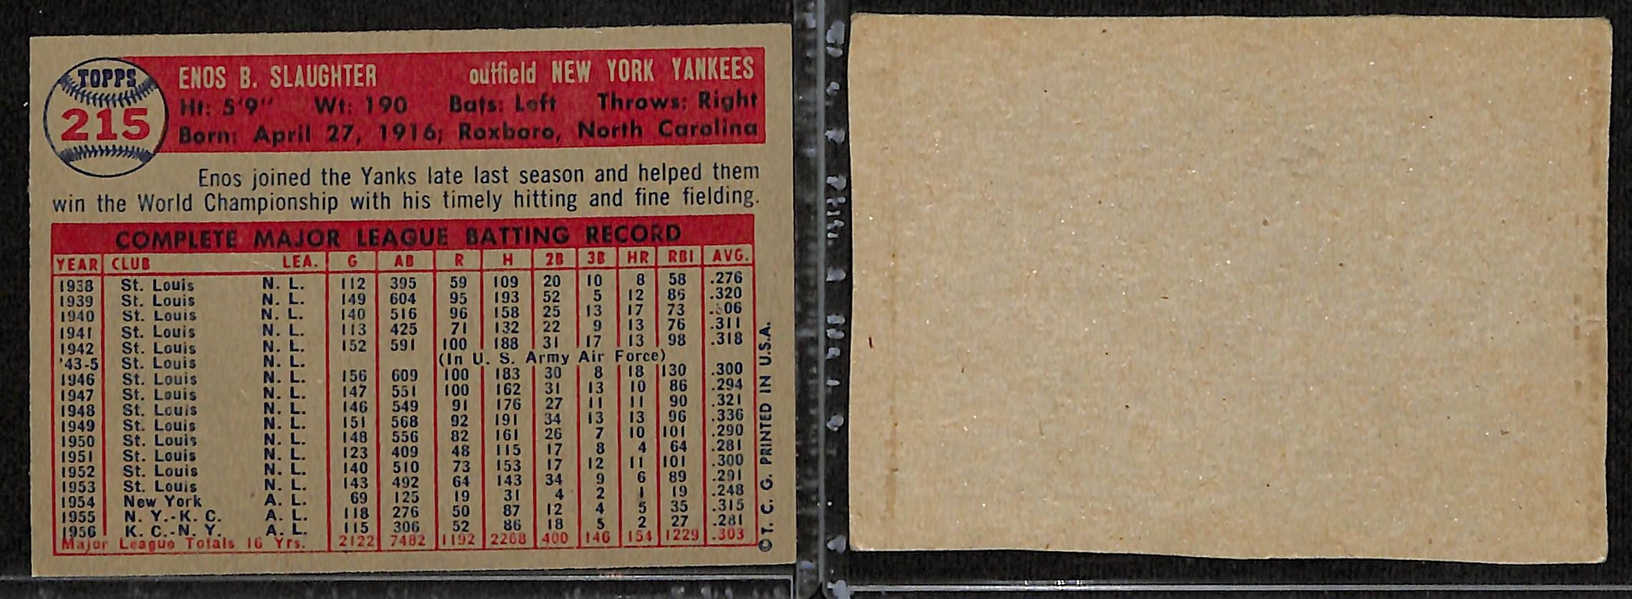 1957 Topps Enos Slaughter Signed Card & 1962 Post Mickey Mantle (JSA Auction Letter)